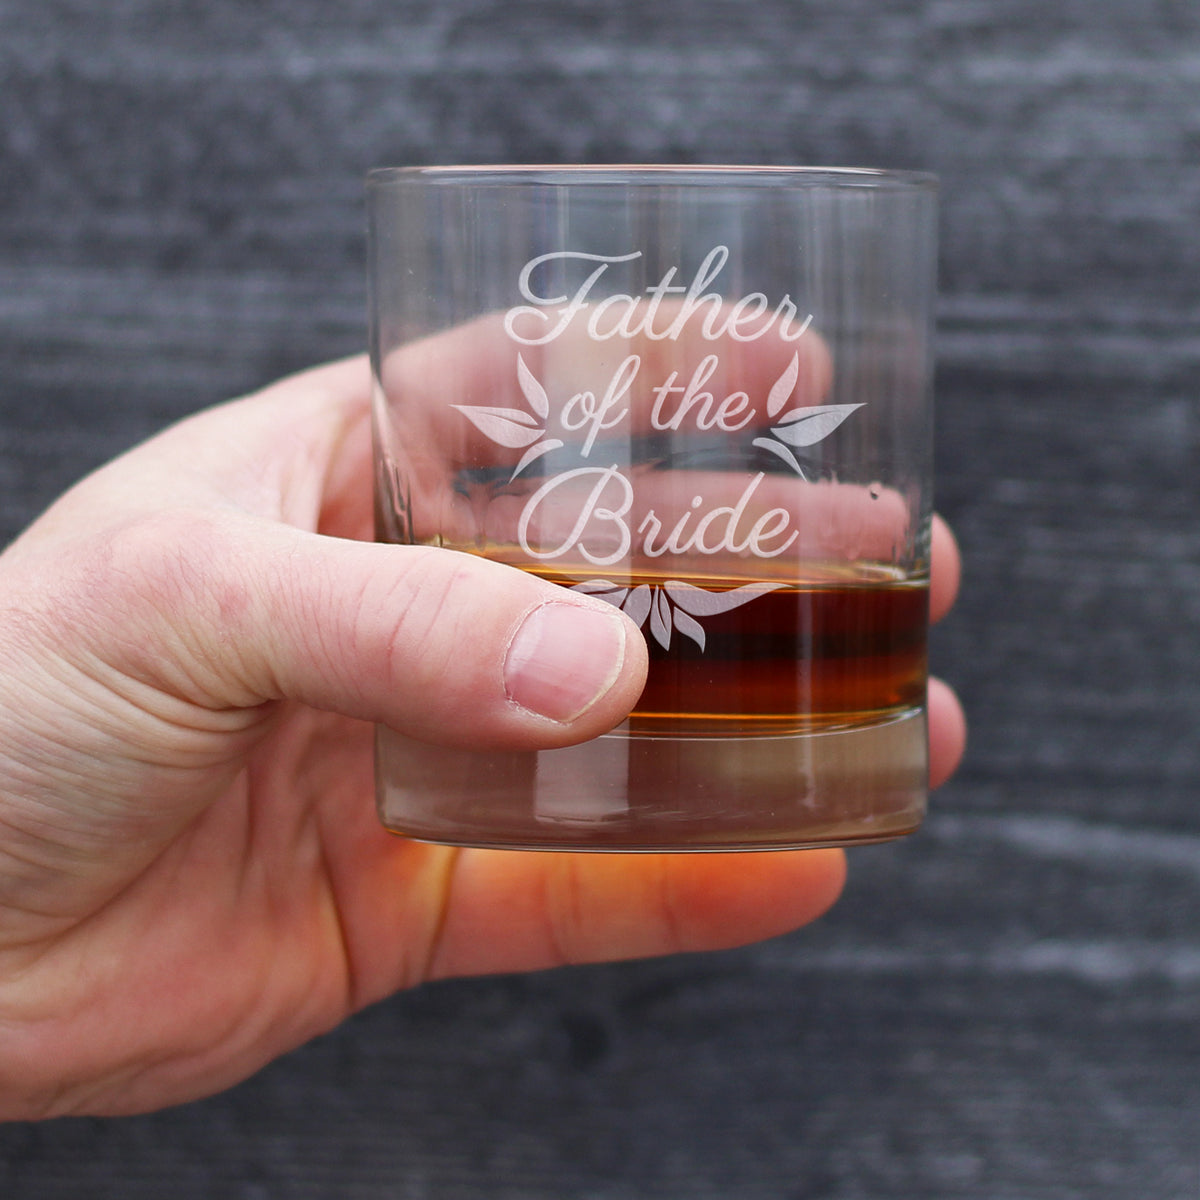 Father of the Bride Old Fashioned Rocks Glass - Unique Wedding Gift for Soon to Be Father-in-Law - Cute Engraved Wedding Cup Gift